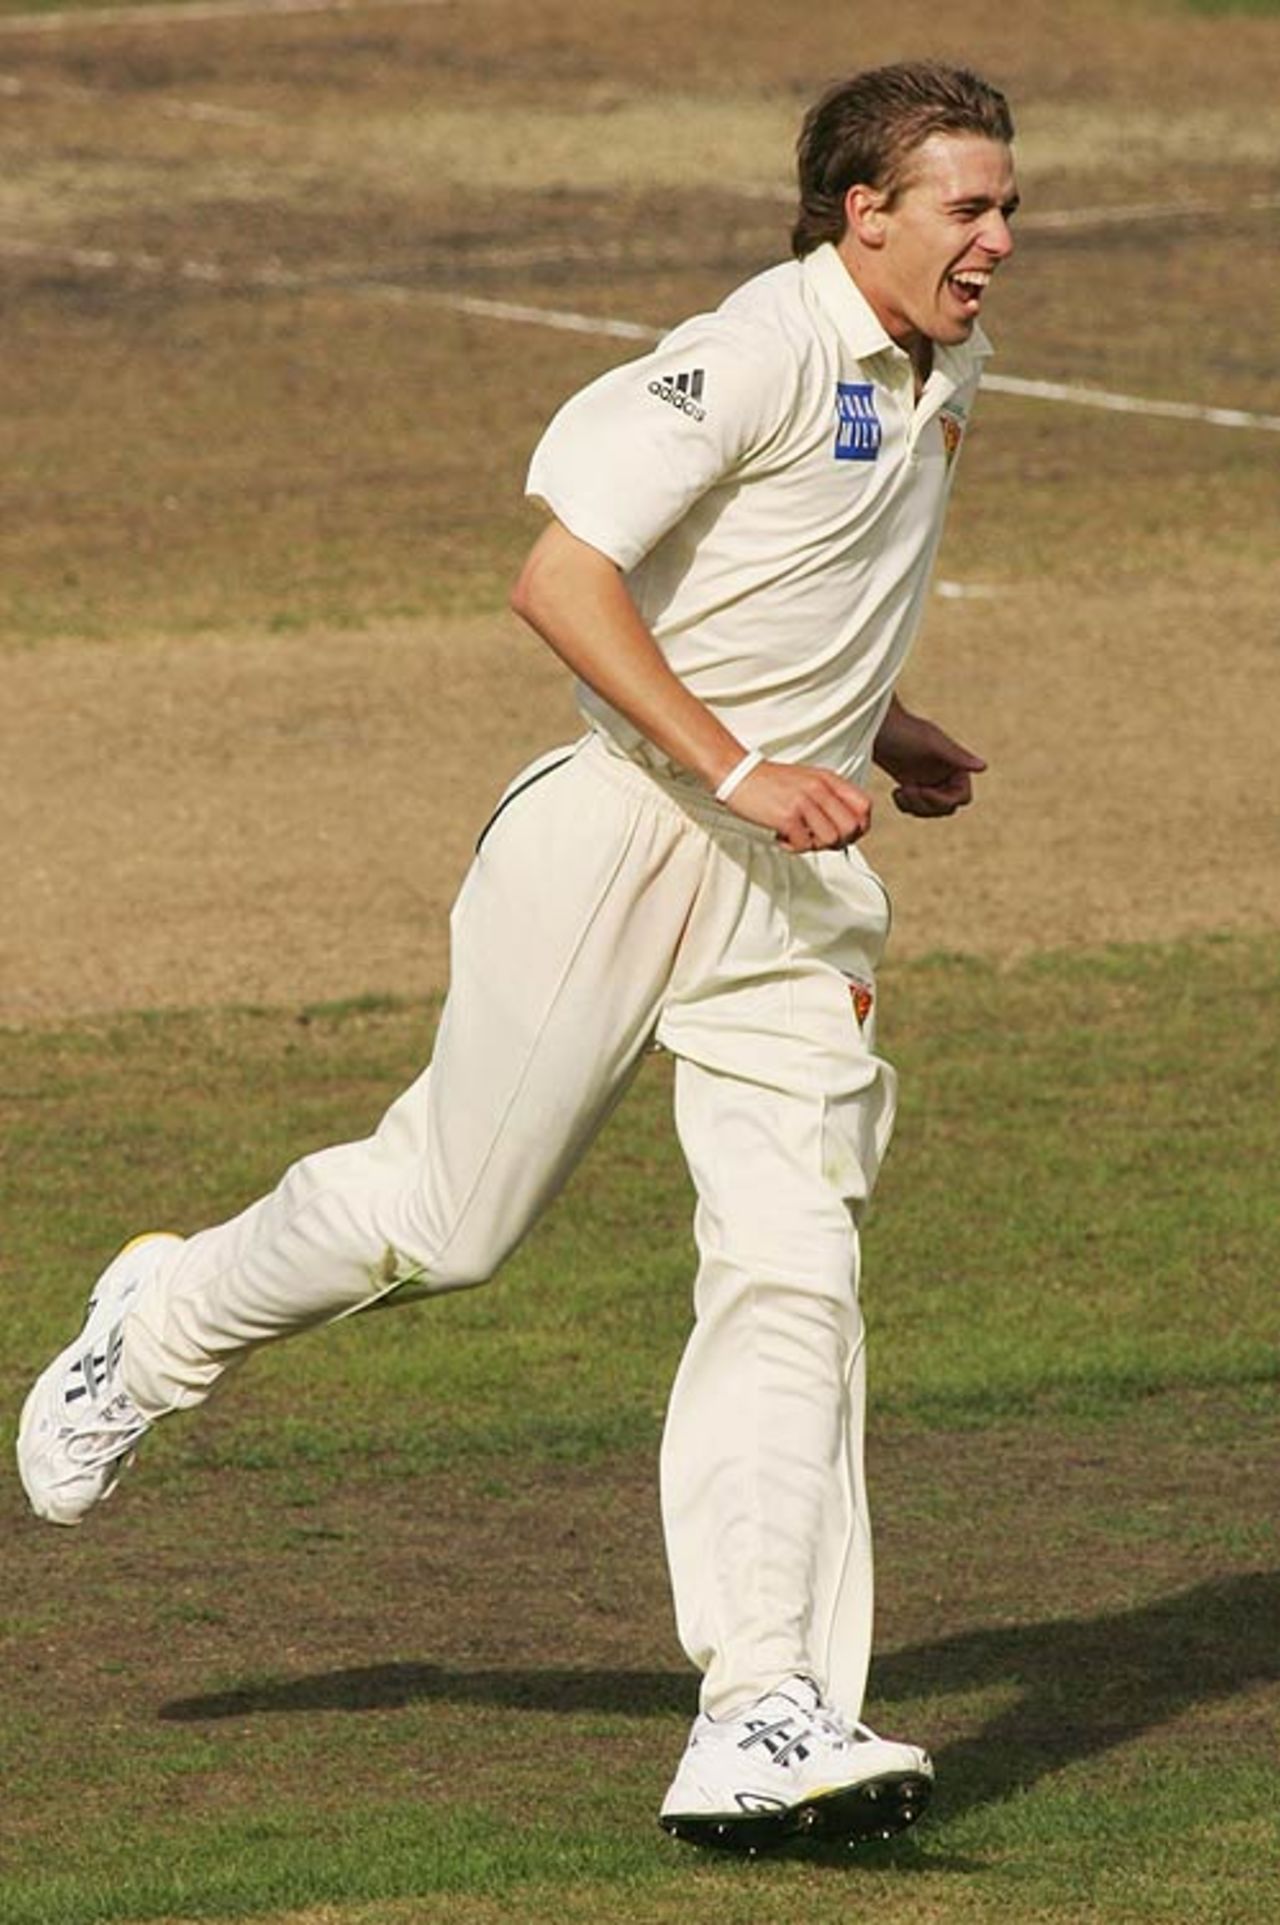 Luke Butterworth celebrates one of his two wickets, Tasmania v New South Wales, Pura Cup final, Hobart, March 20, 2007